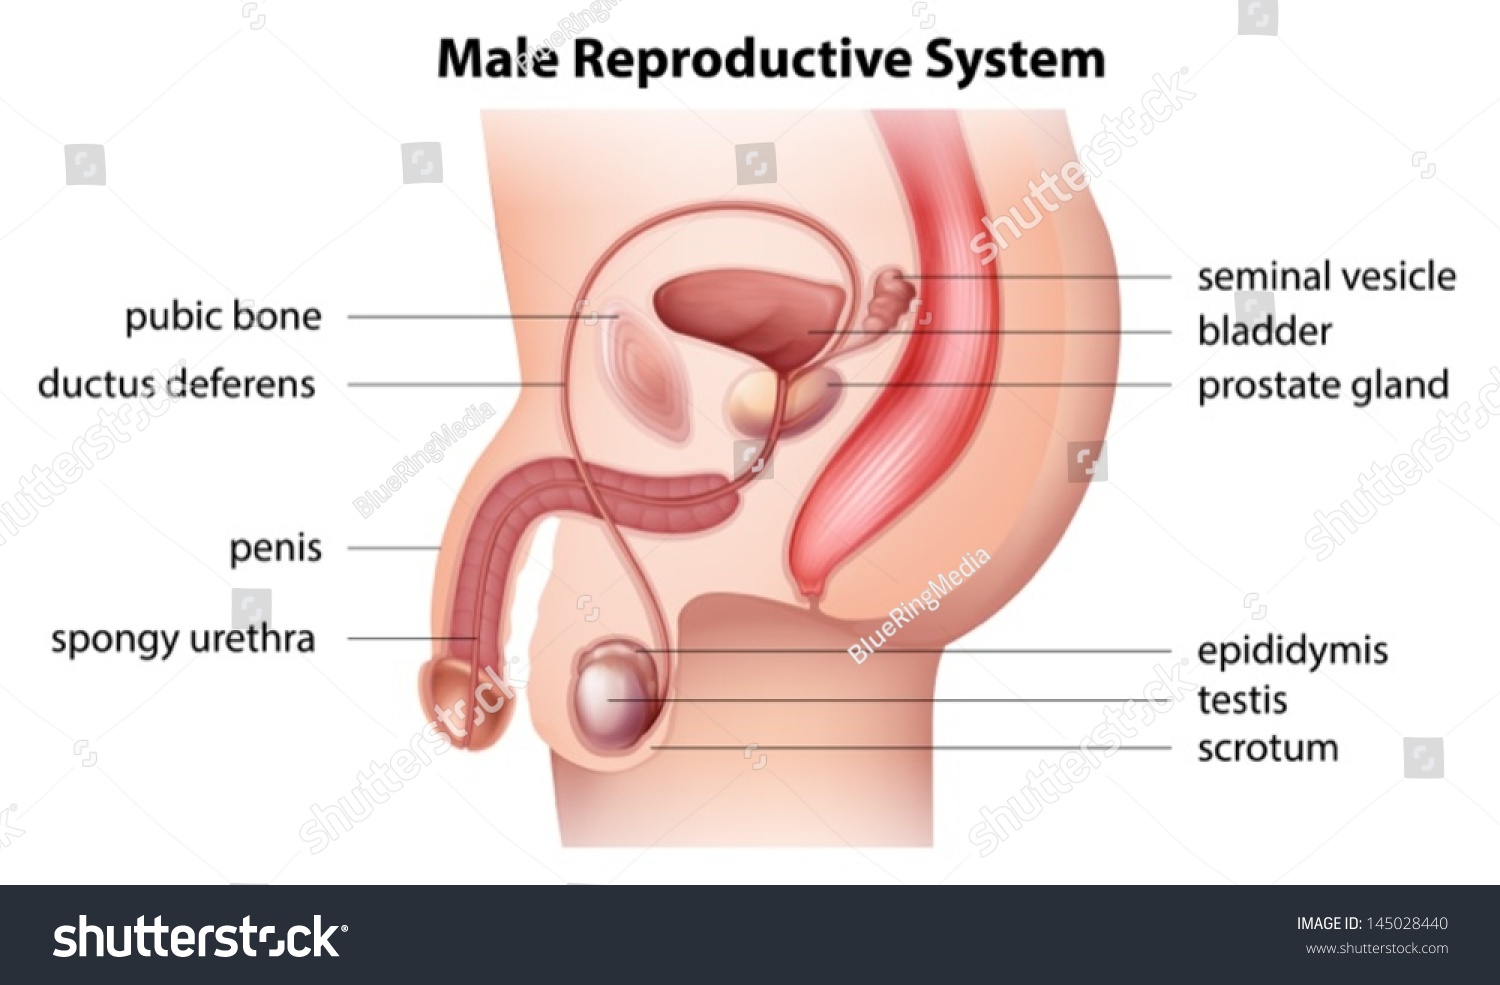 Illustration Showing The Male Reproductive System 145028440 